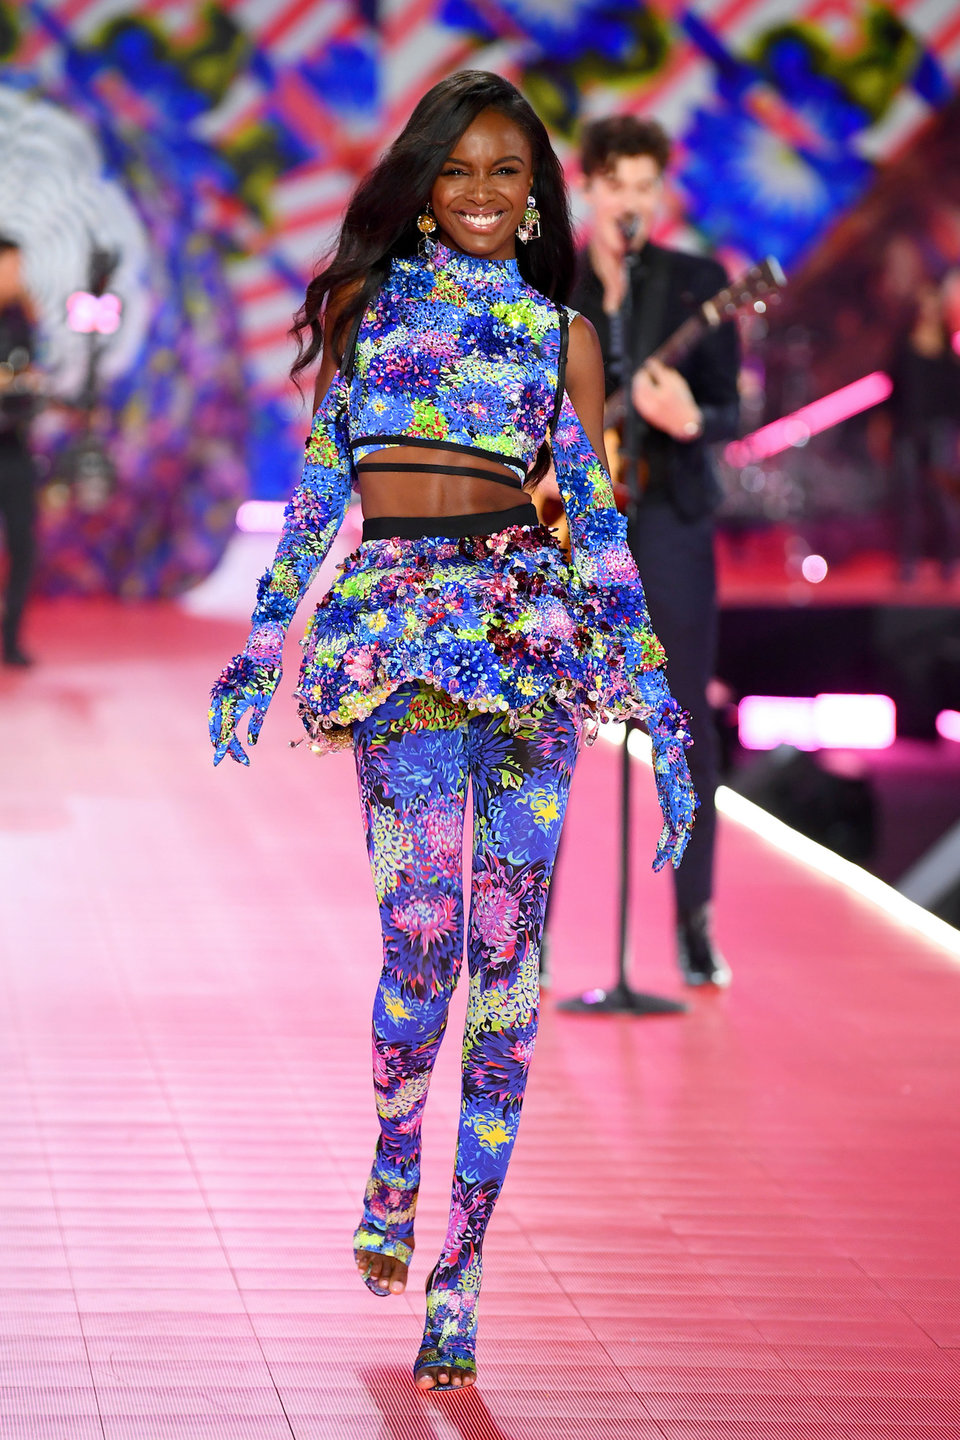 Leomie Anderson walks the runway at the 2018 Victoria's Secret Fashion Show.